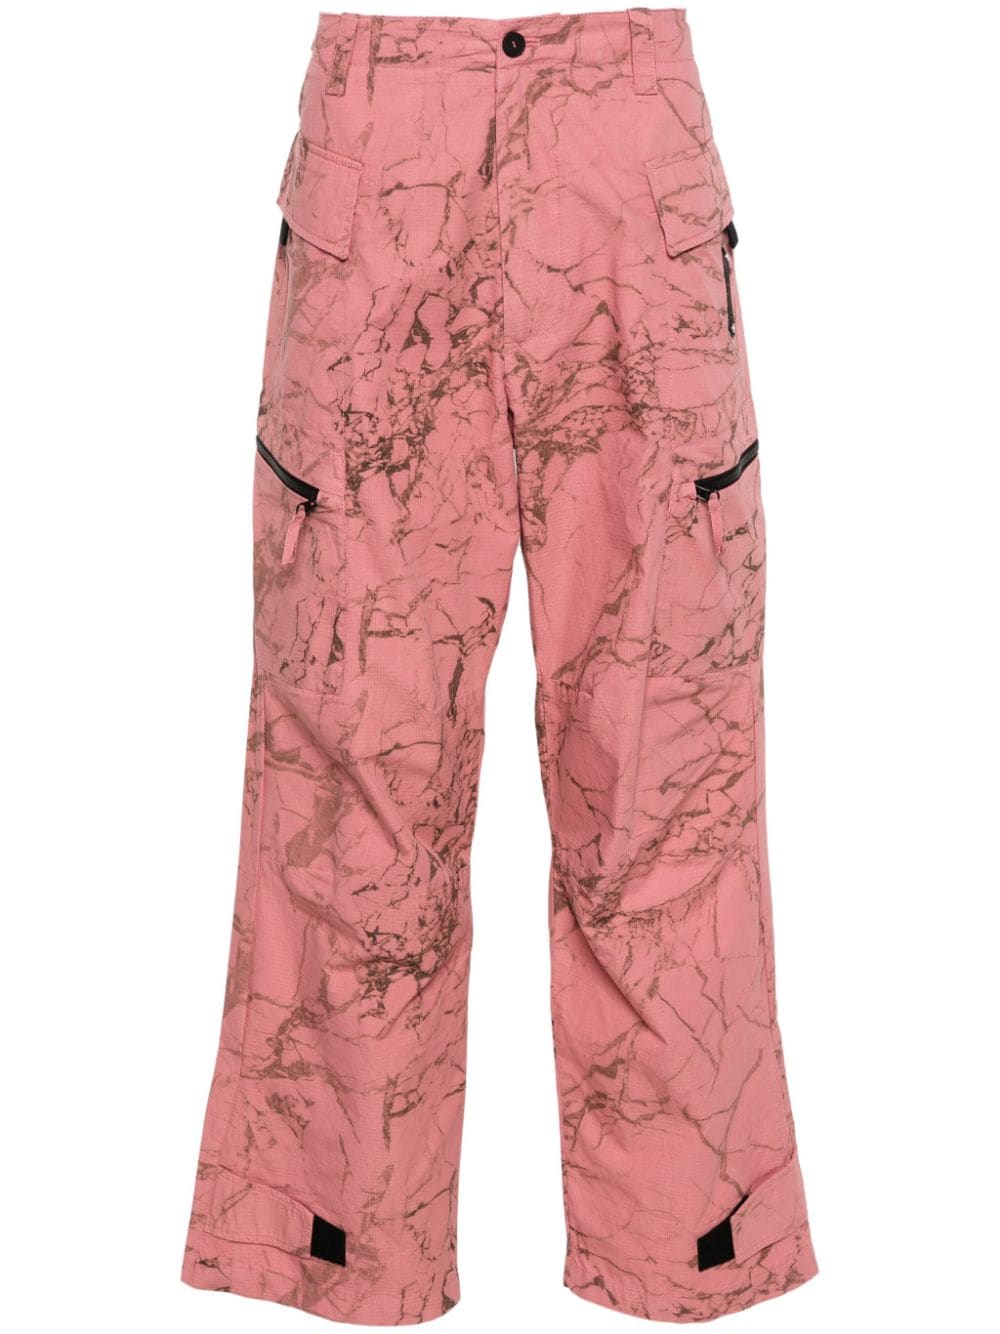 A-COLD-WALL* Overdye Static Cargohose - Rosa von A-COLD-WALL*